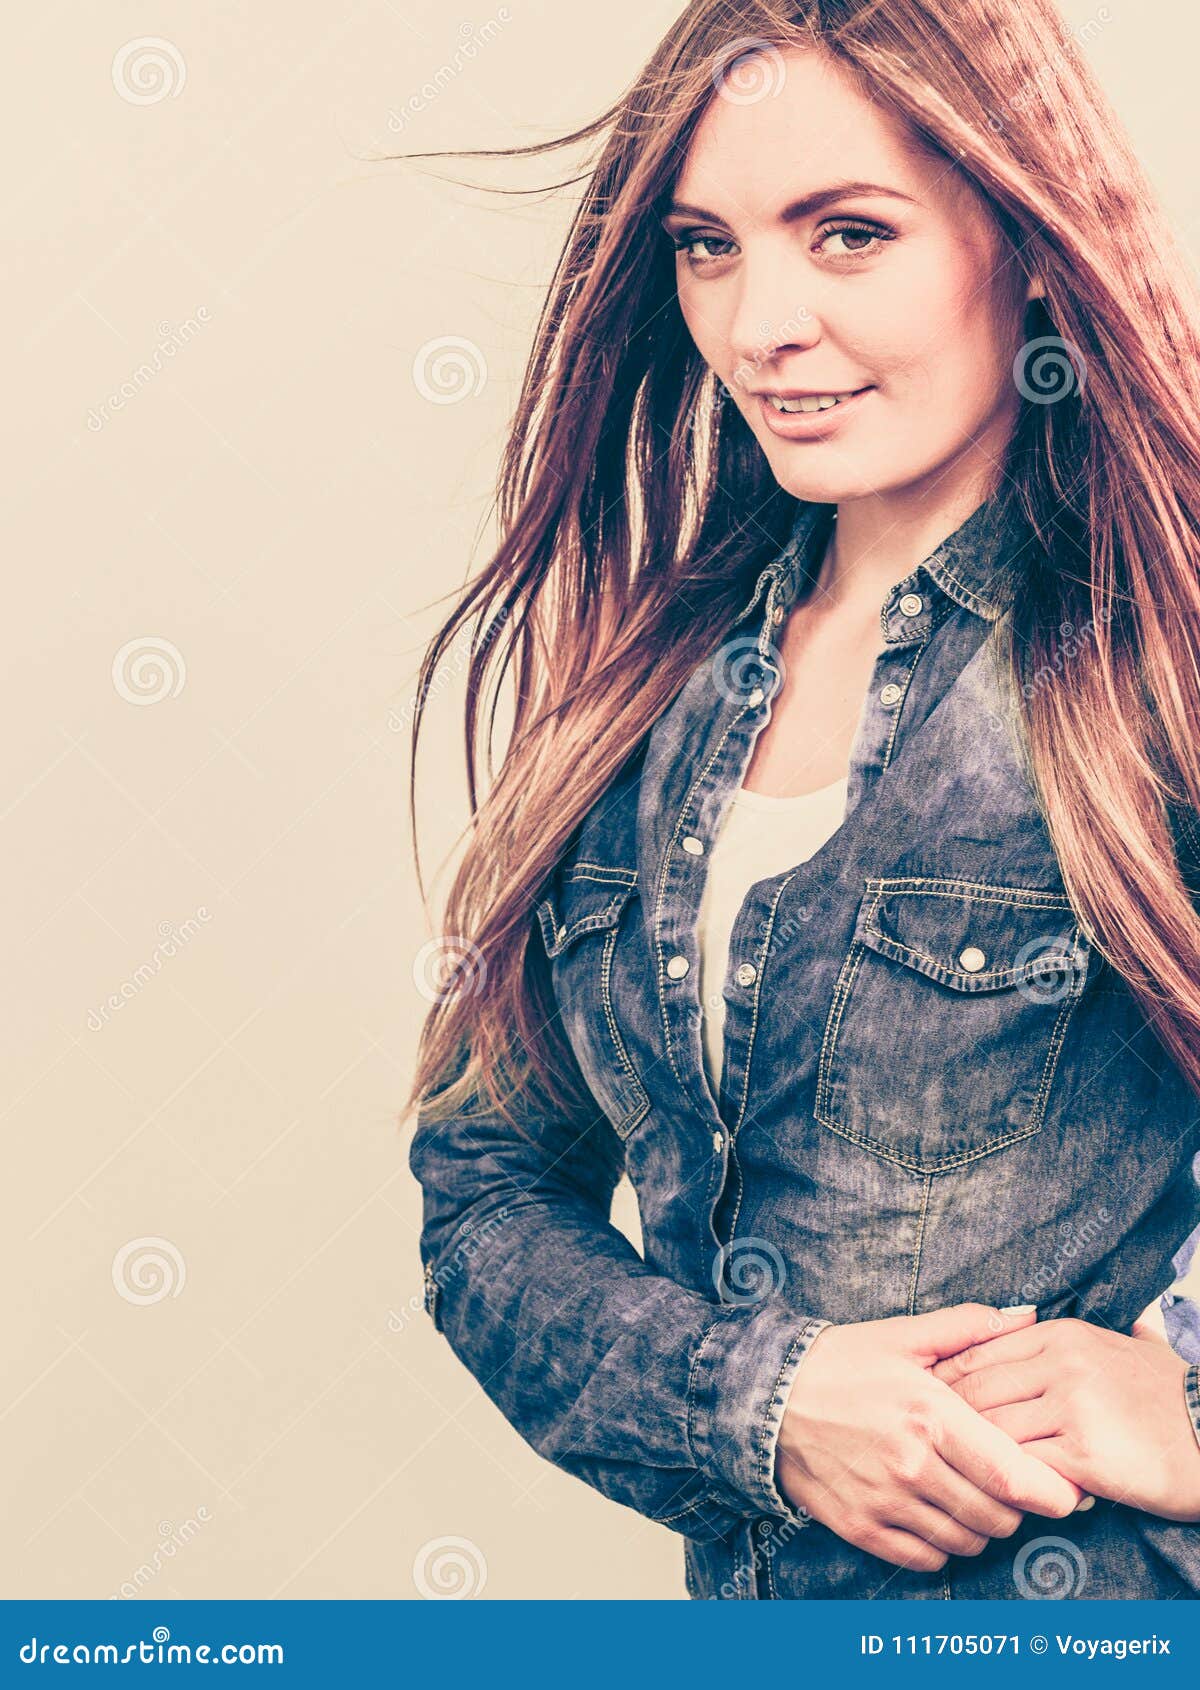 Focused Girl Wearing Jeans. Stock Image - Image of blue, woman: 111705071